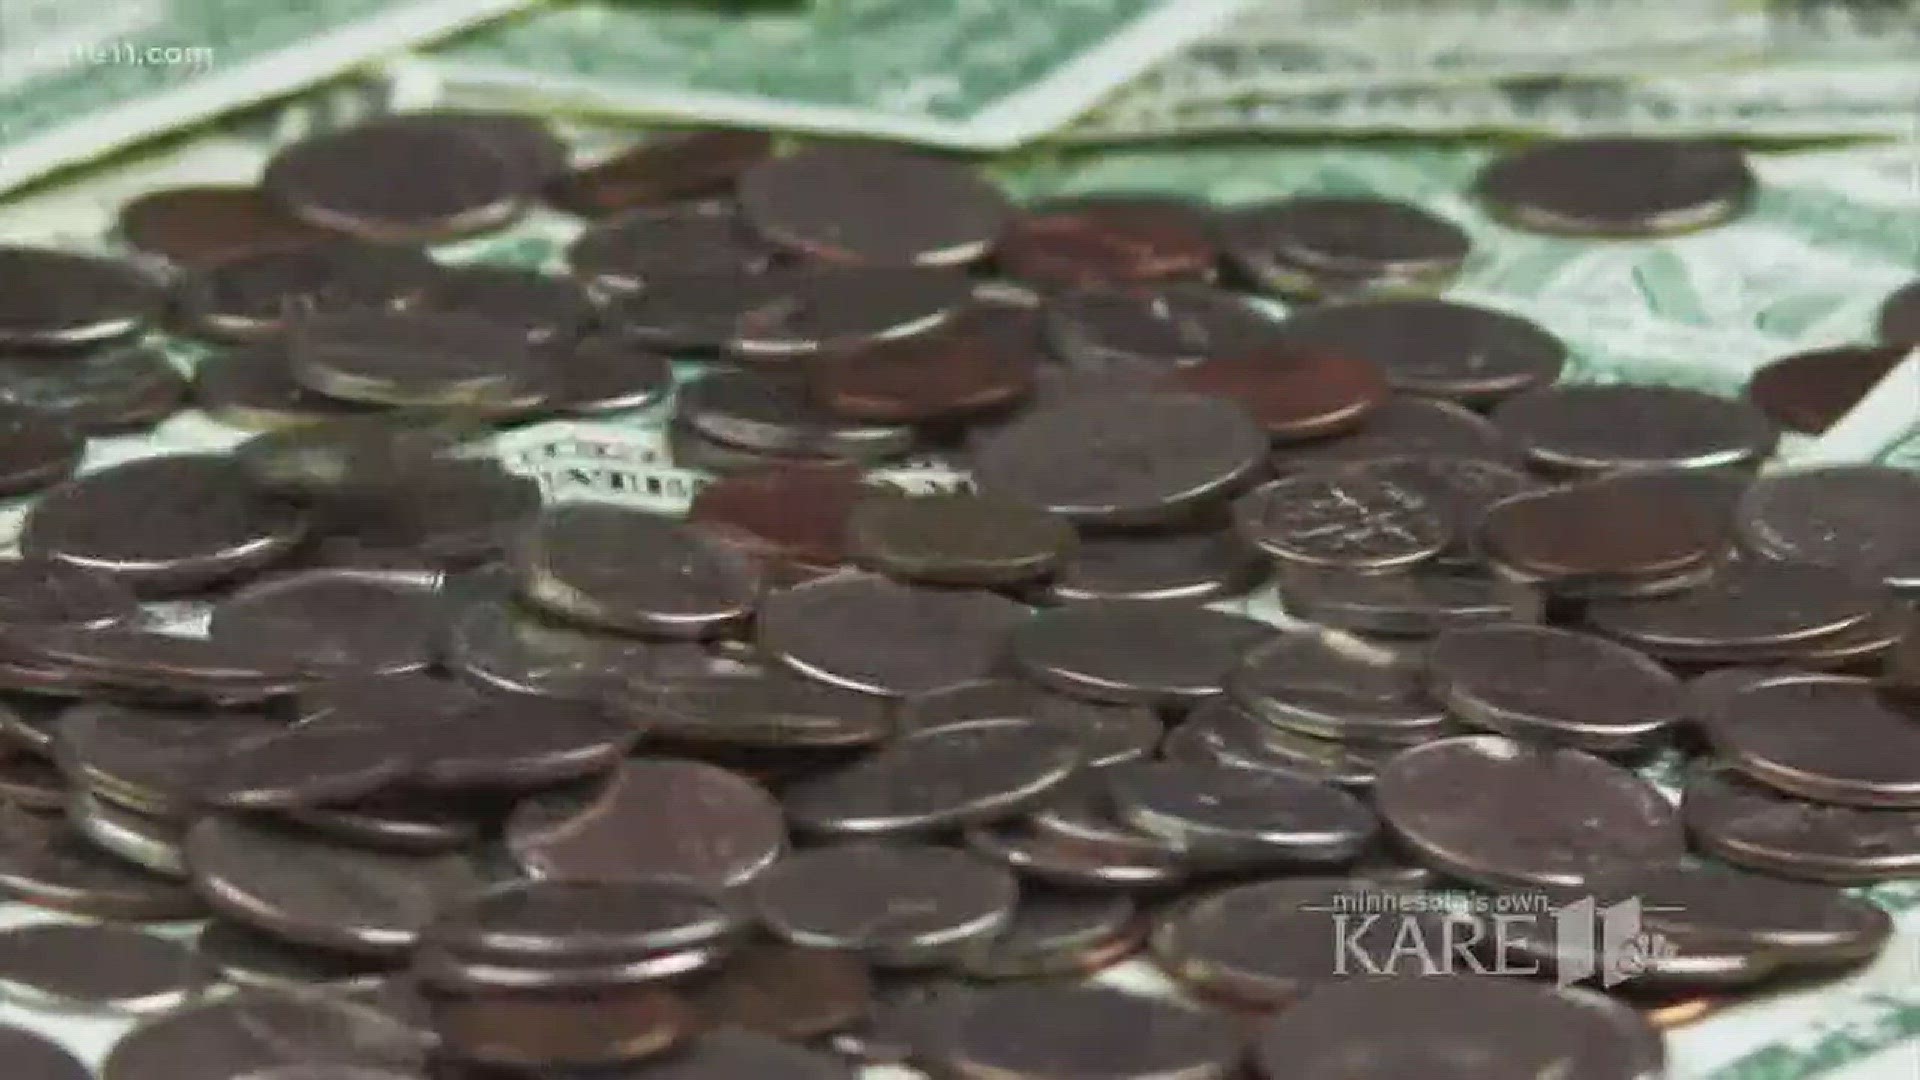 Spring cleaning not just for your home, but your finances as well. Local financial professional Matt Gulbransen, owner of Pine Grove Financial Group, shared 5 tips to spring clean your financial house. http://kare11.tv/2HLwh8d